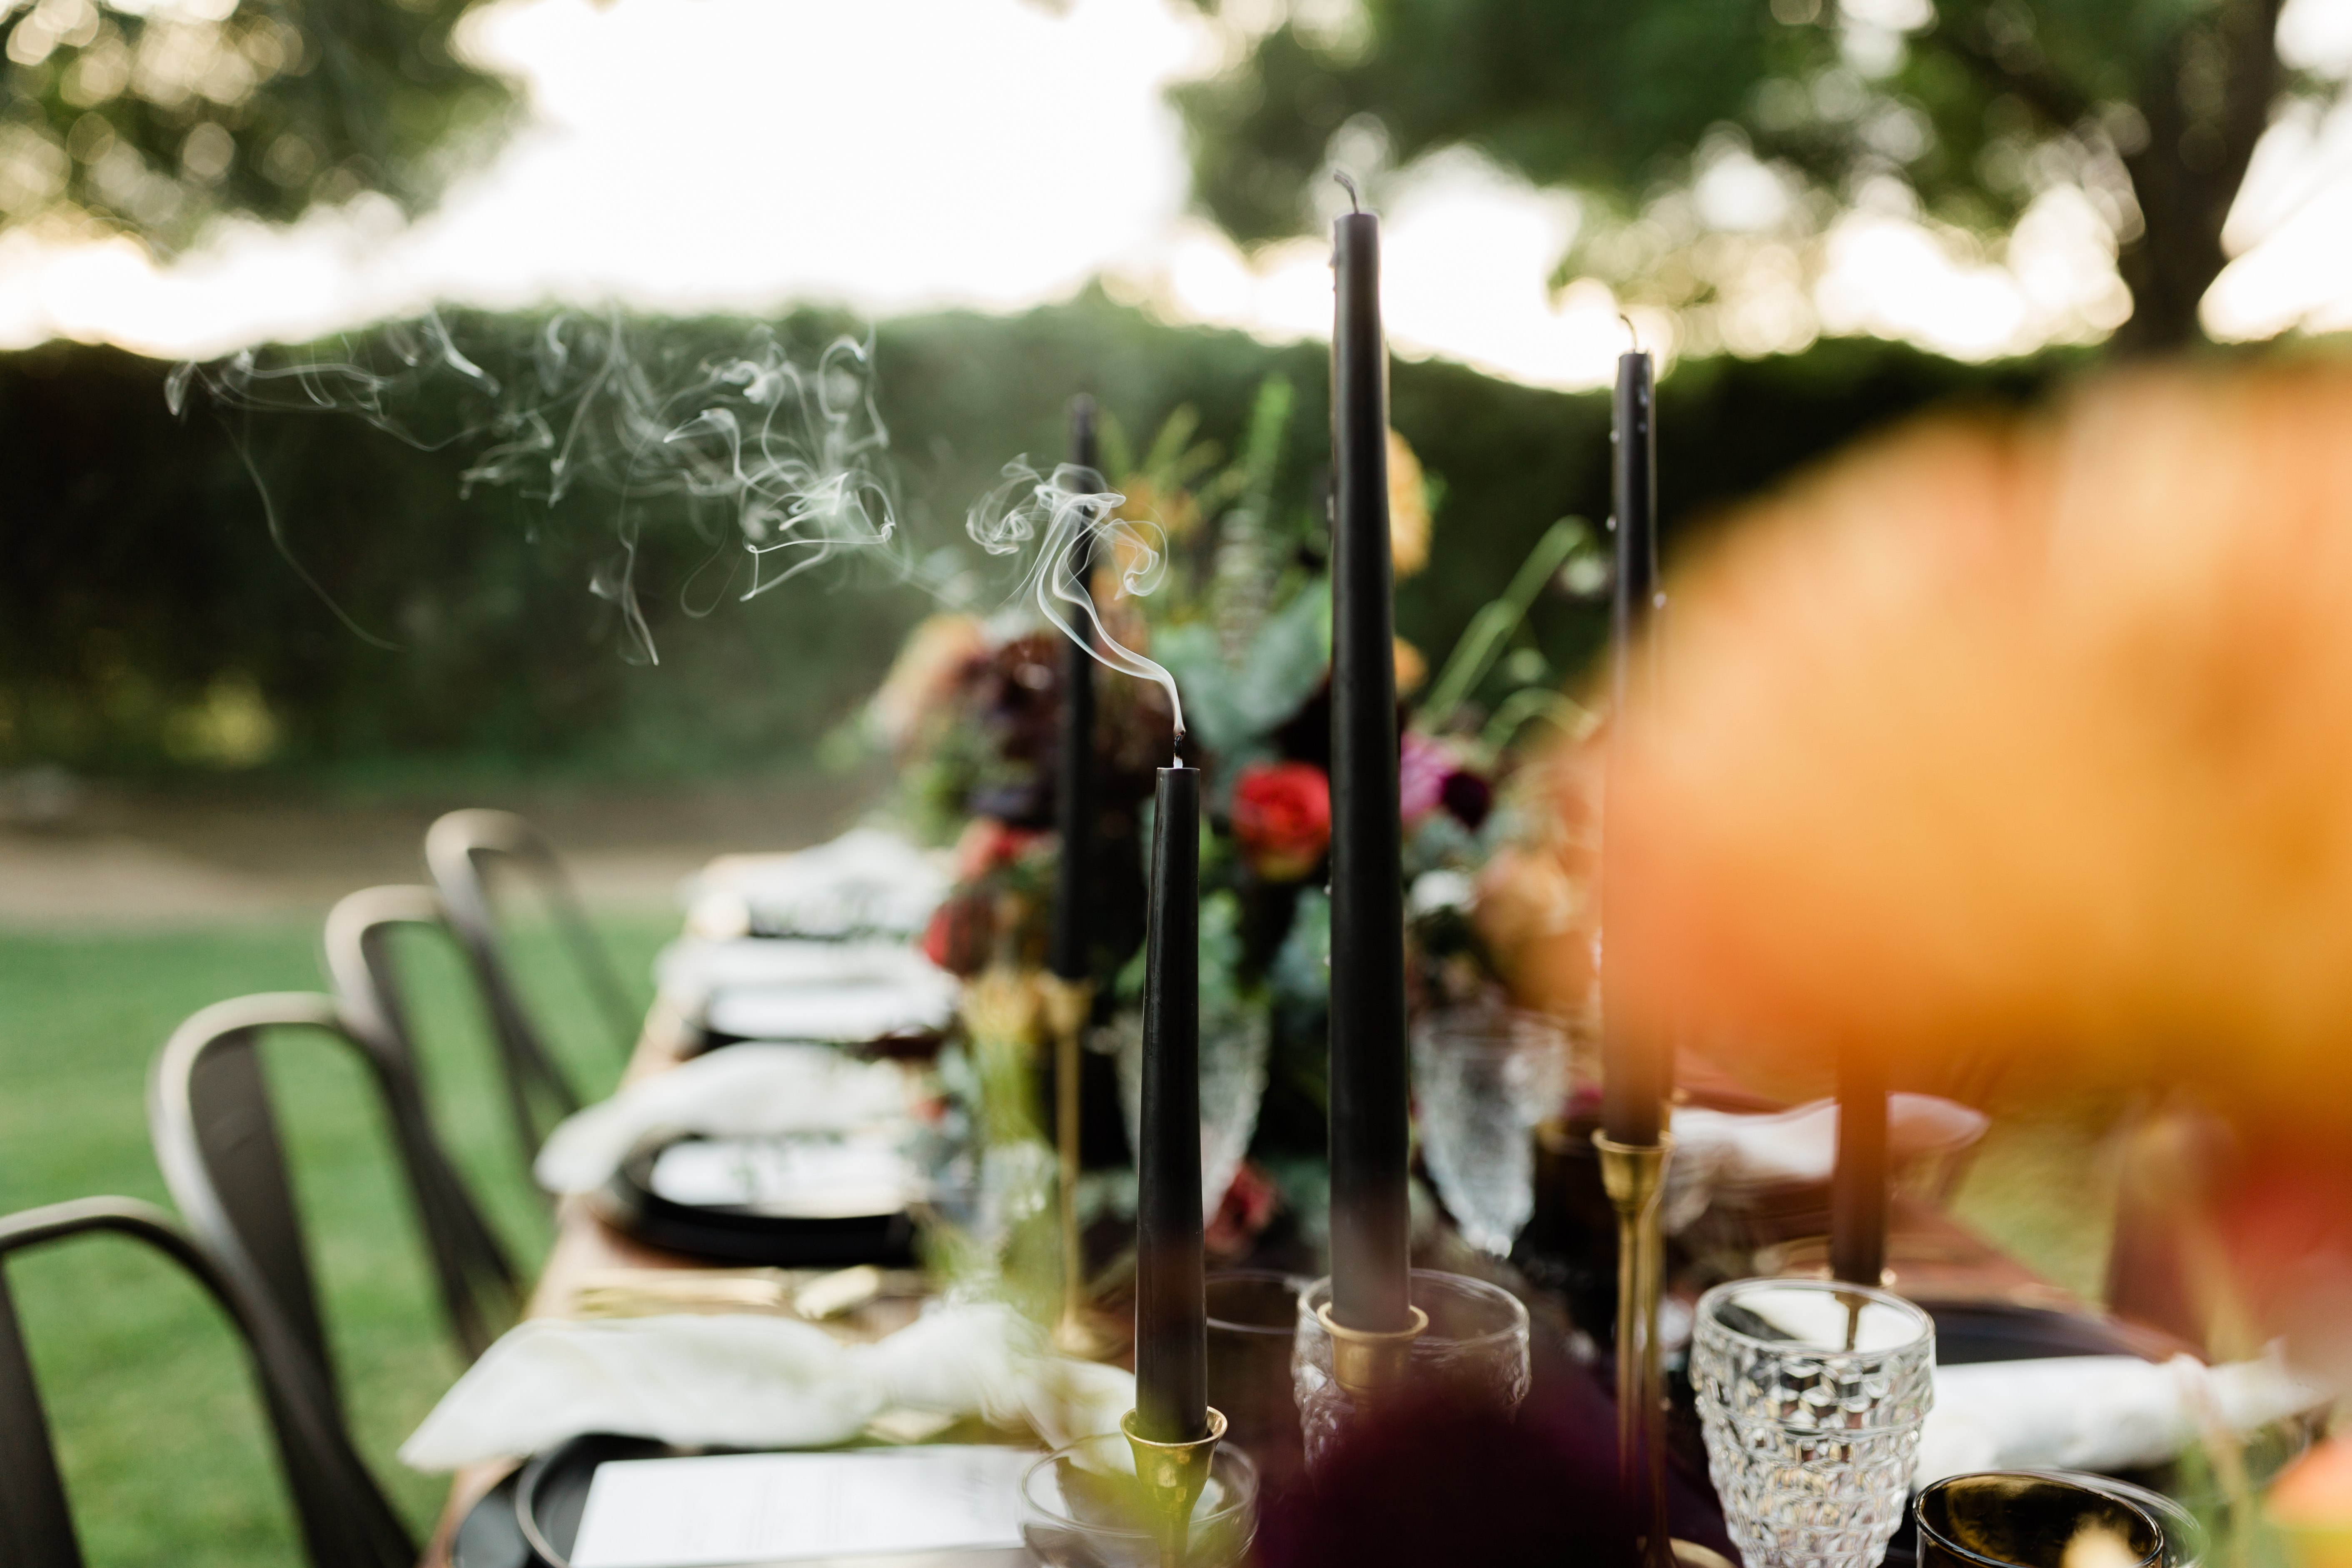 smoke coming off a black candle on a halloween wedding table setting